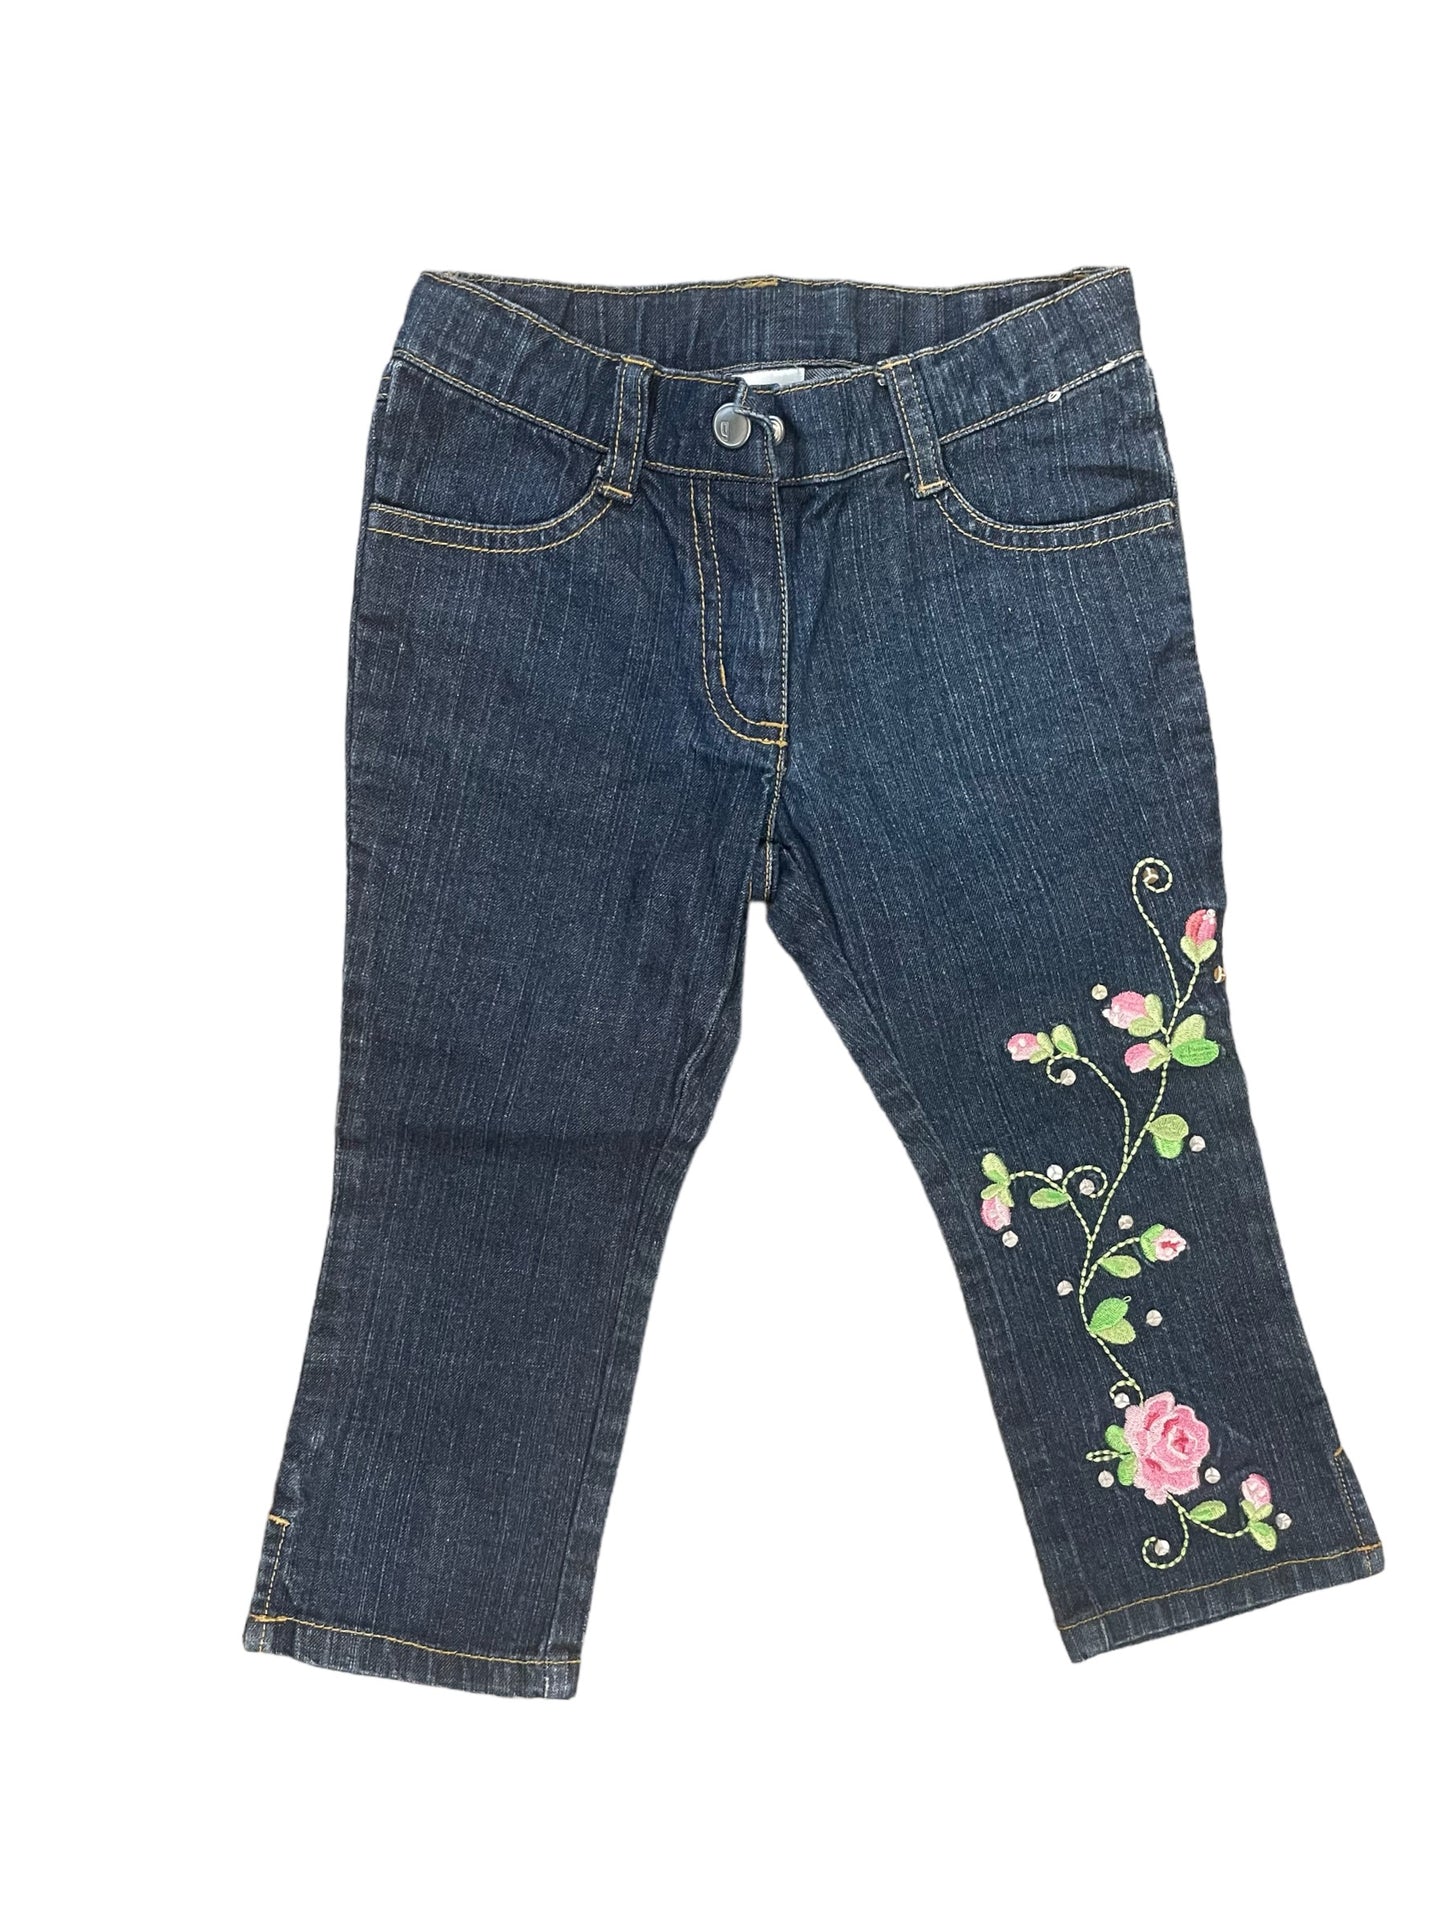 Gymboree Girls Jeans Size 4 with flower embroidery